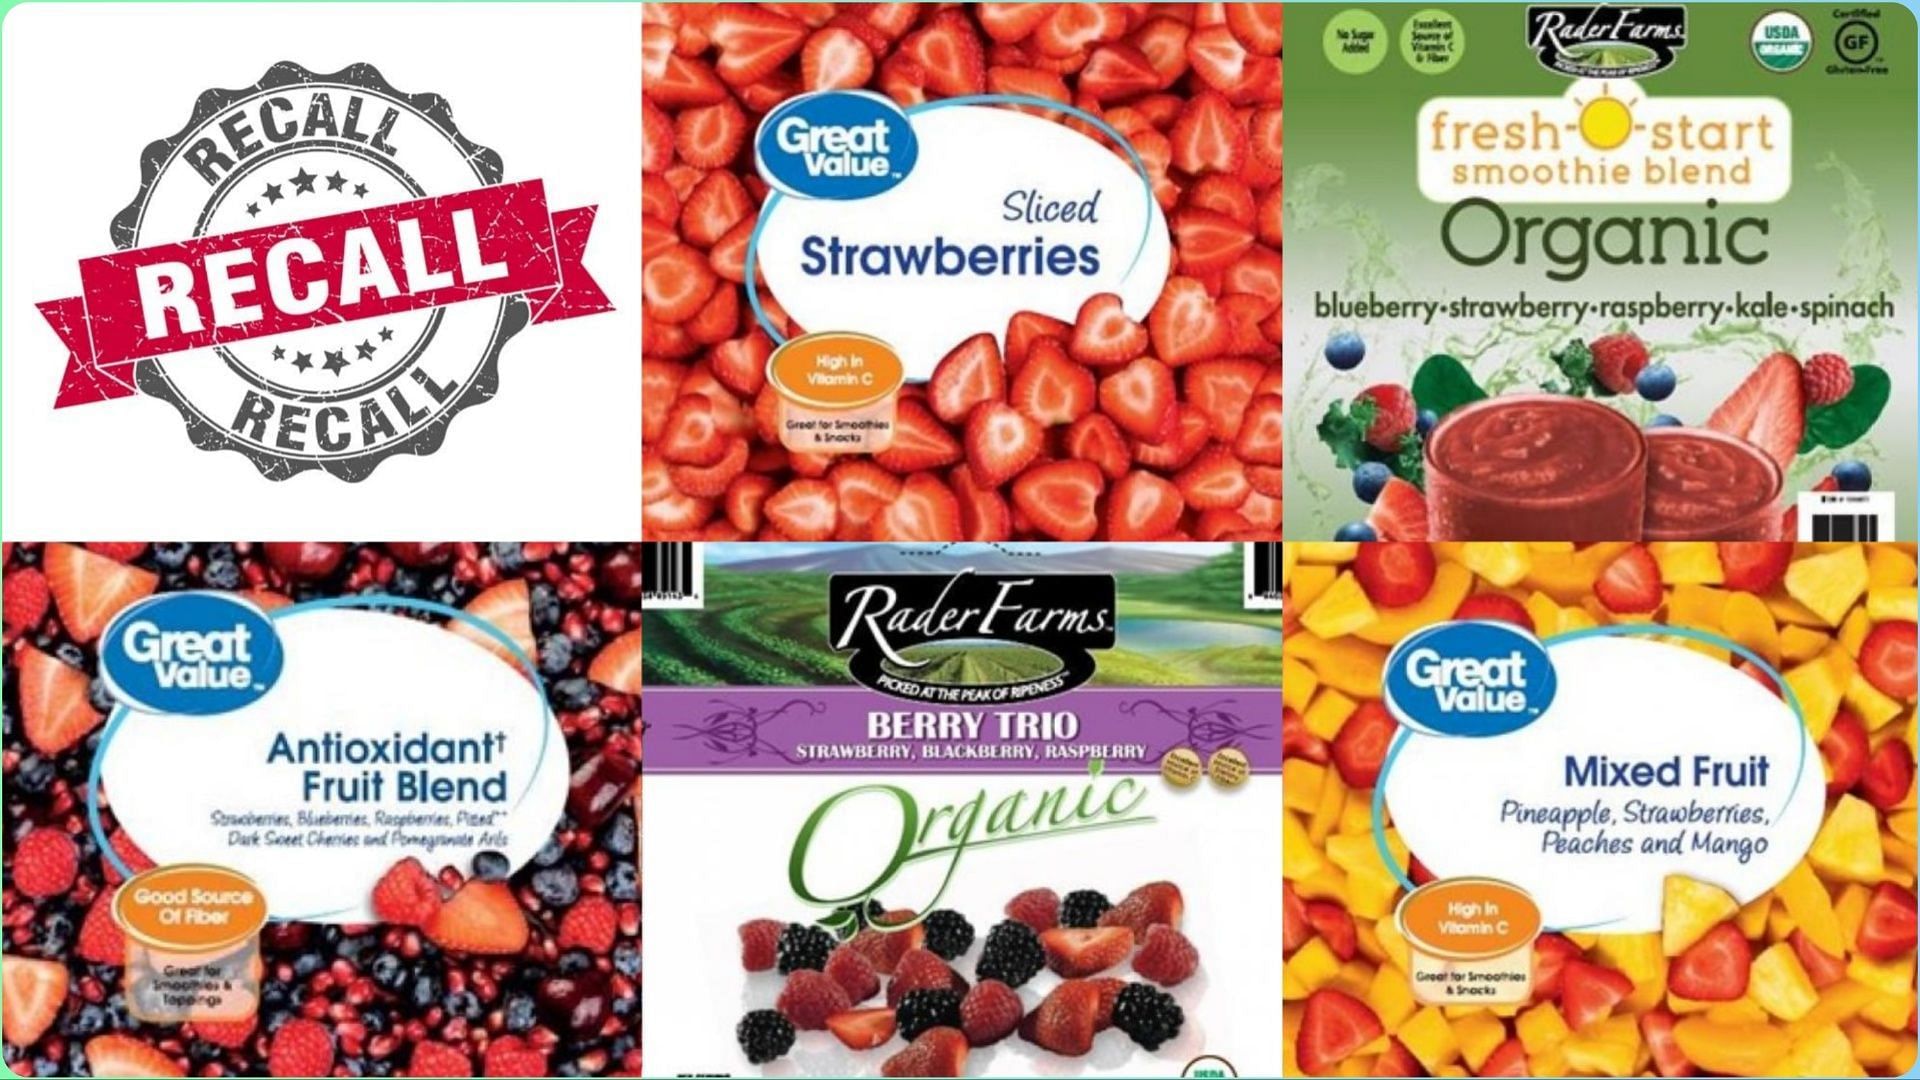 Willamette Valley Fruit Co. recalls Great Value and Rader Farms frozen fruit product over a potential Hepatitis A contamination concern (Image via FDA)